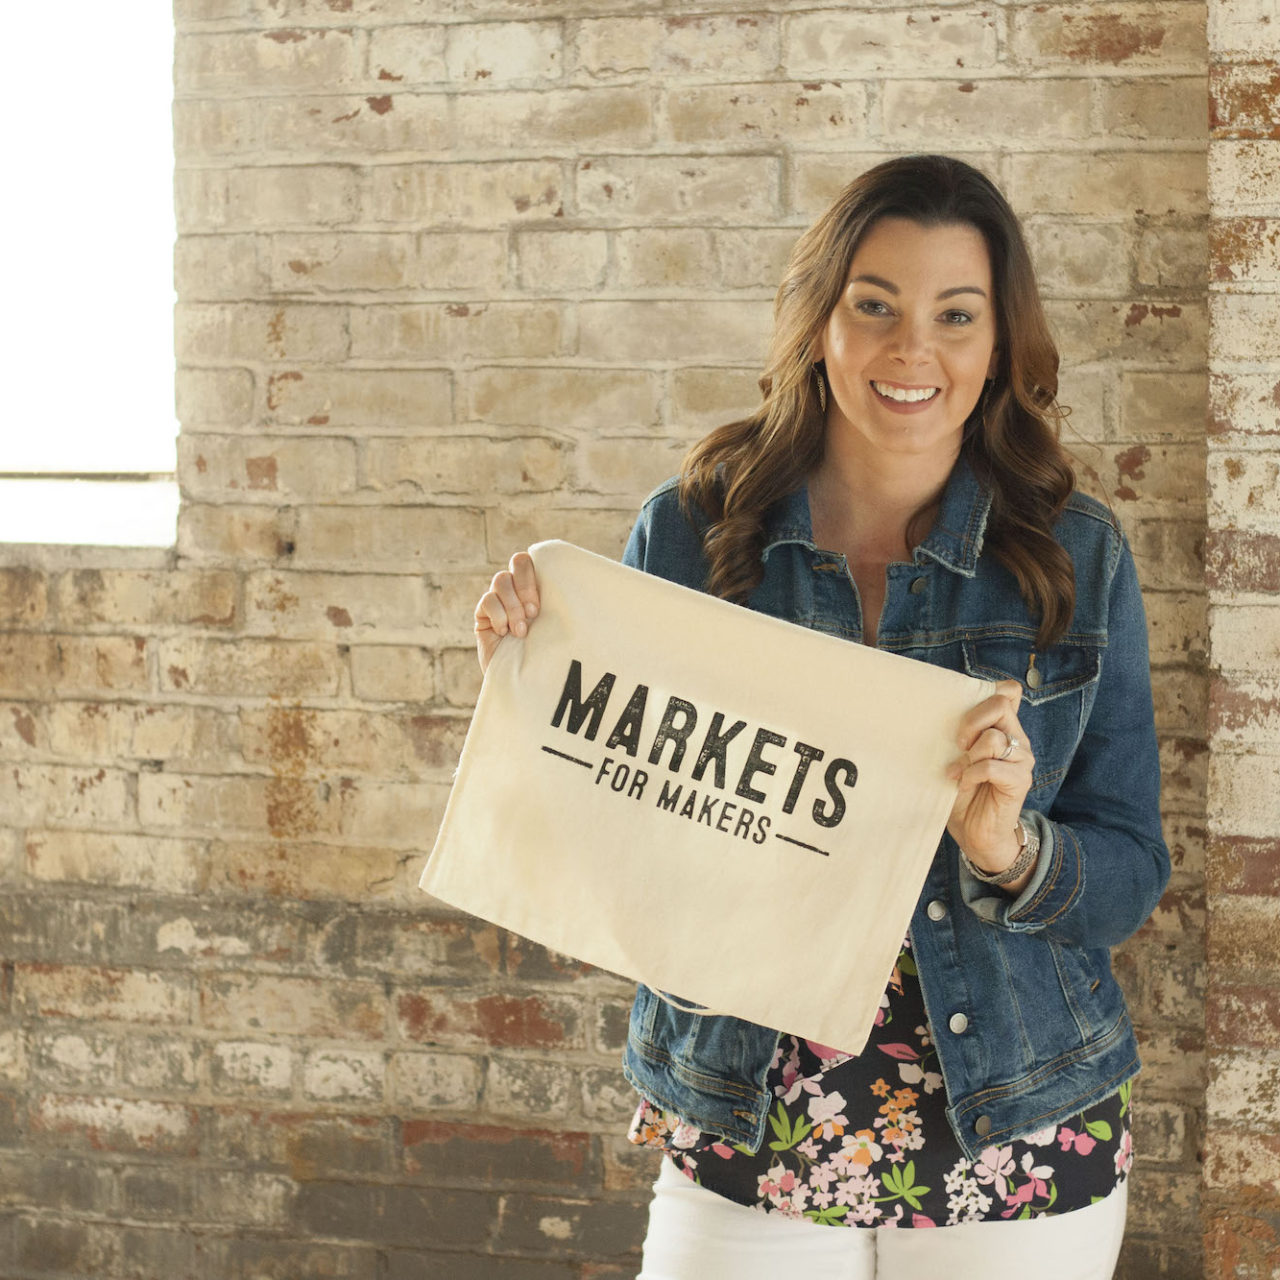 Shop Local: Markets for Makers